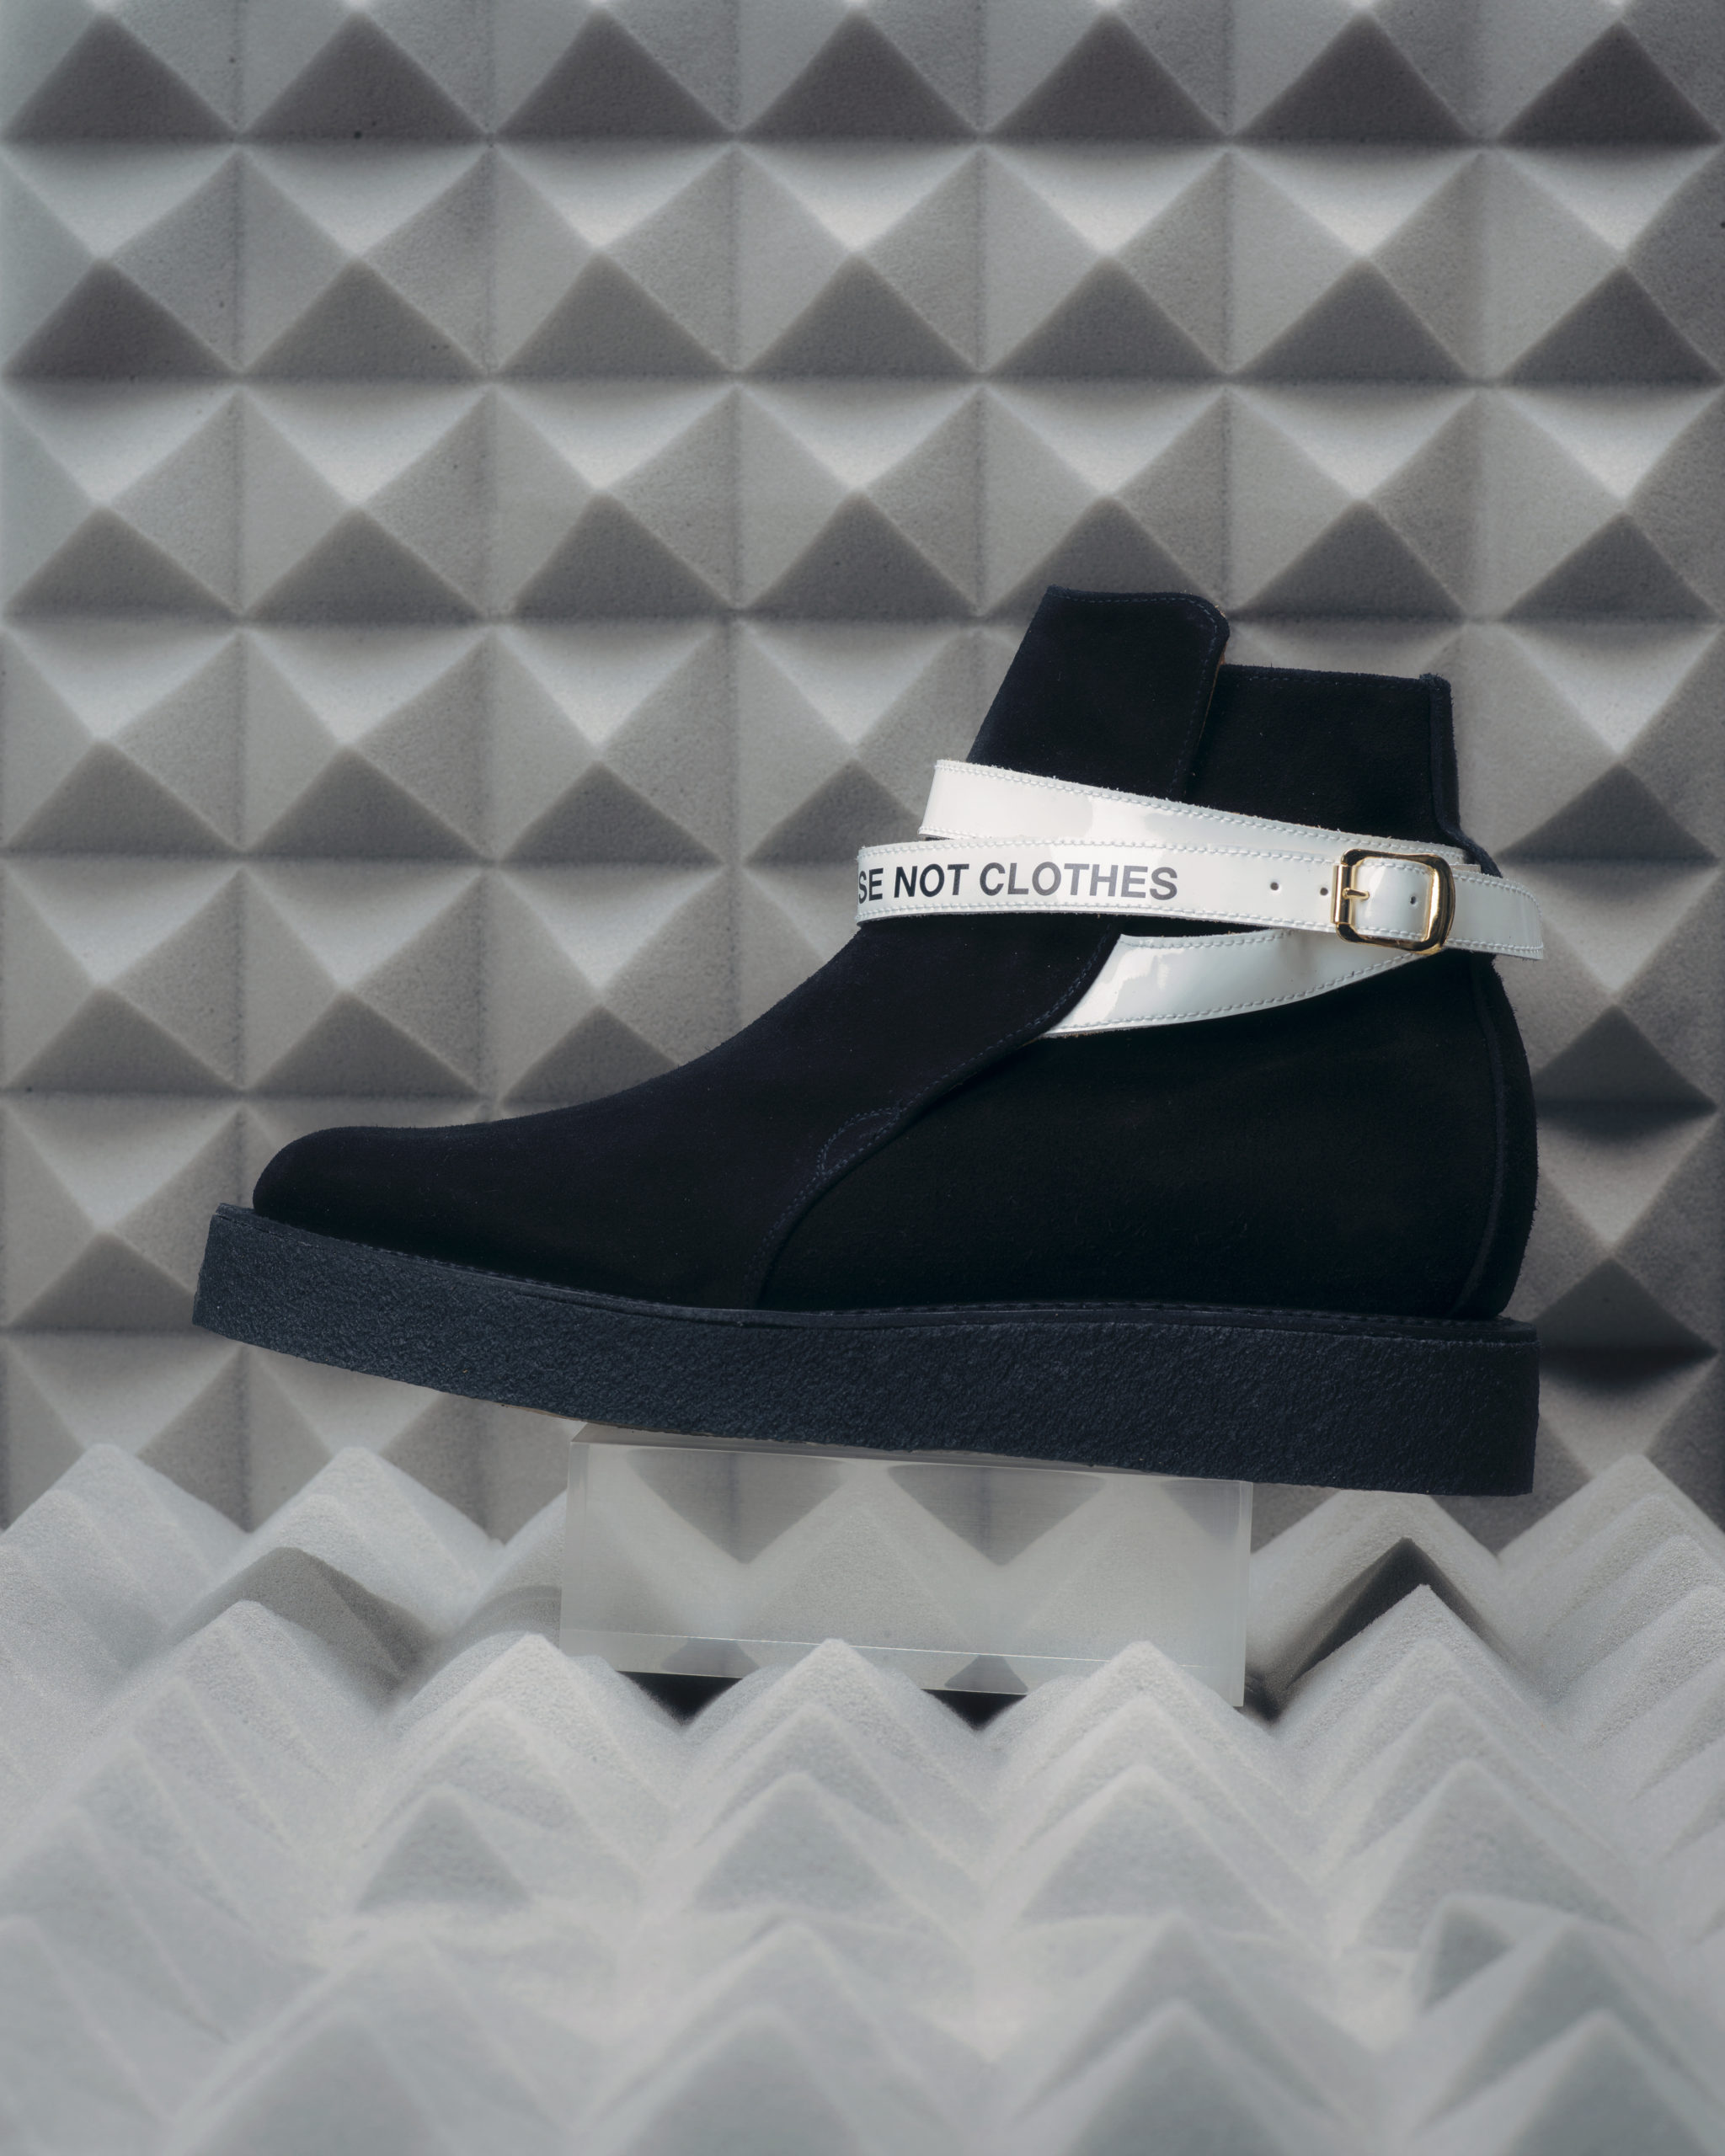 GEORGE COX × UNDERCOVER collaboration shoes | Them magazine